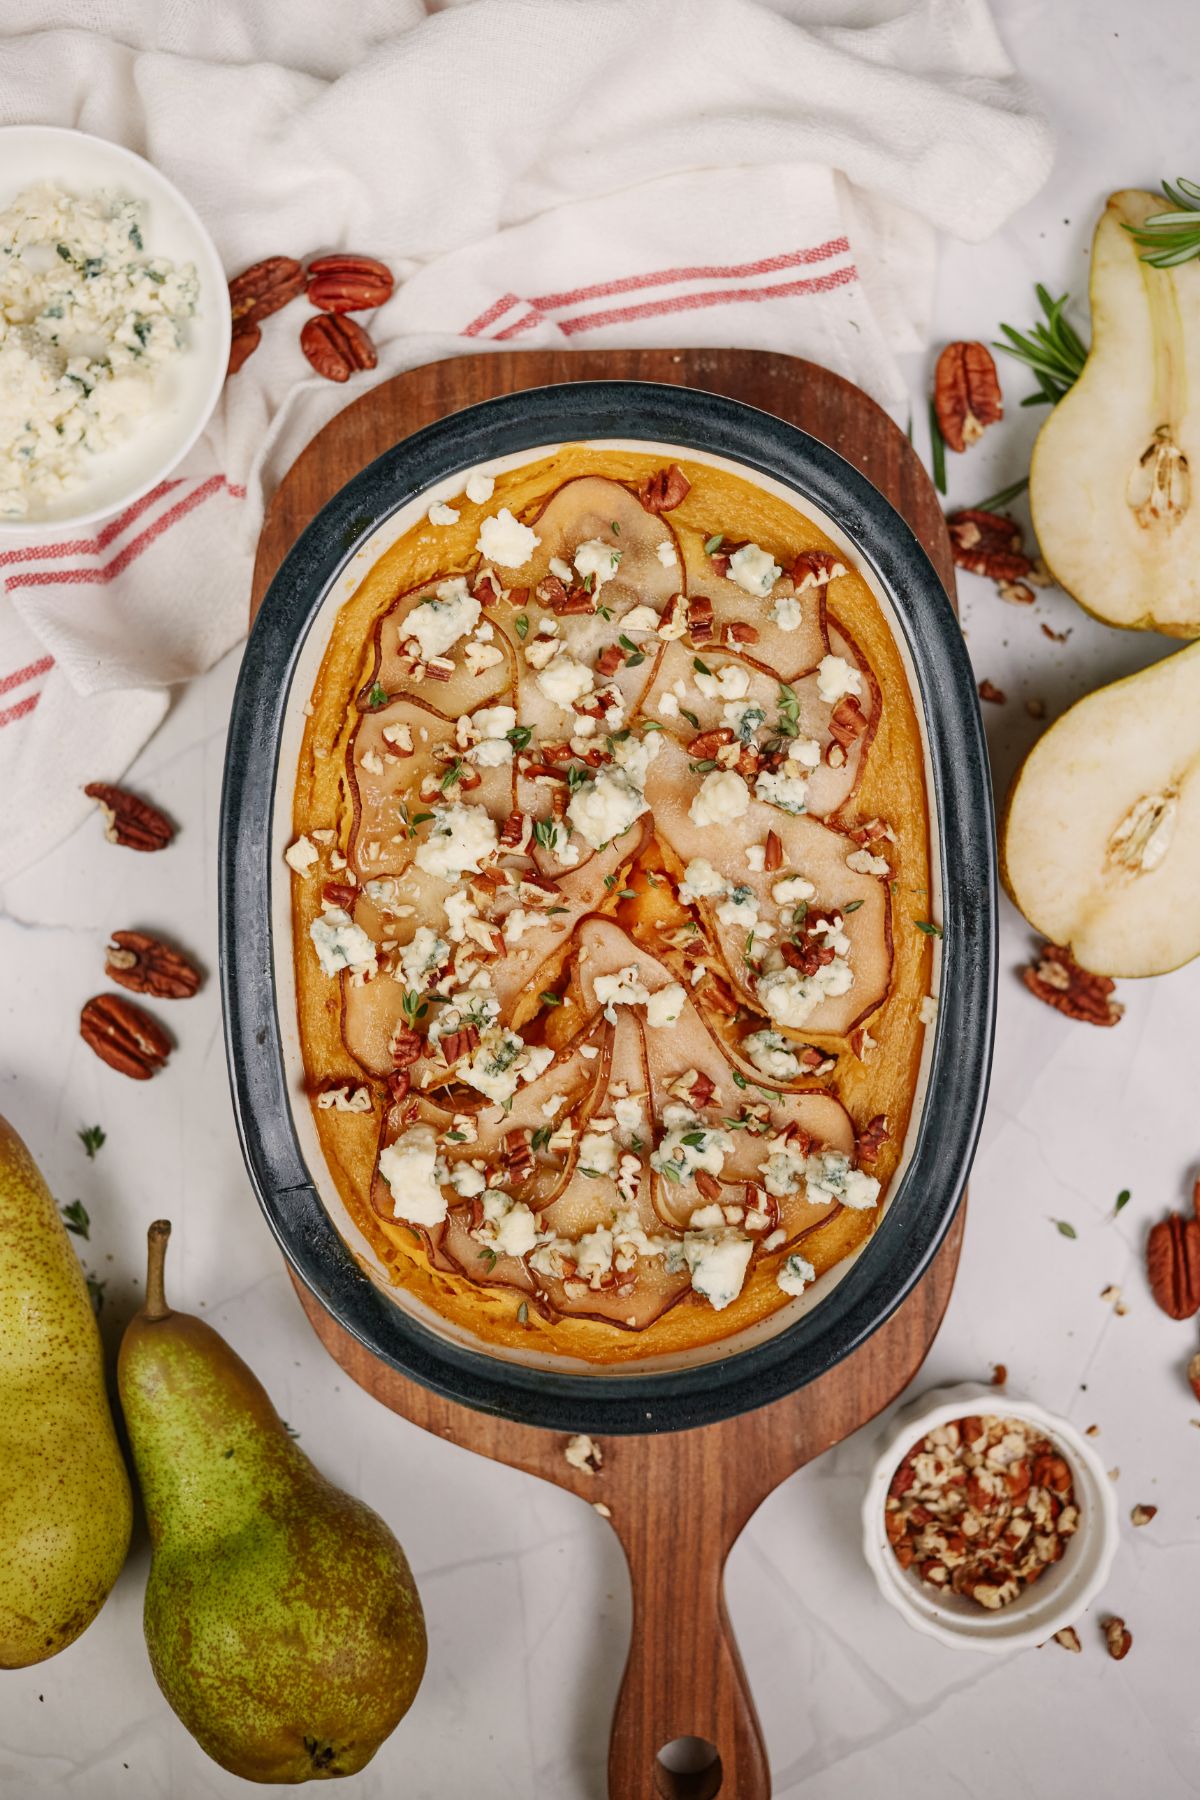 oval baking dish of sweet potato casserole with pears sitting on top of cutting board